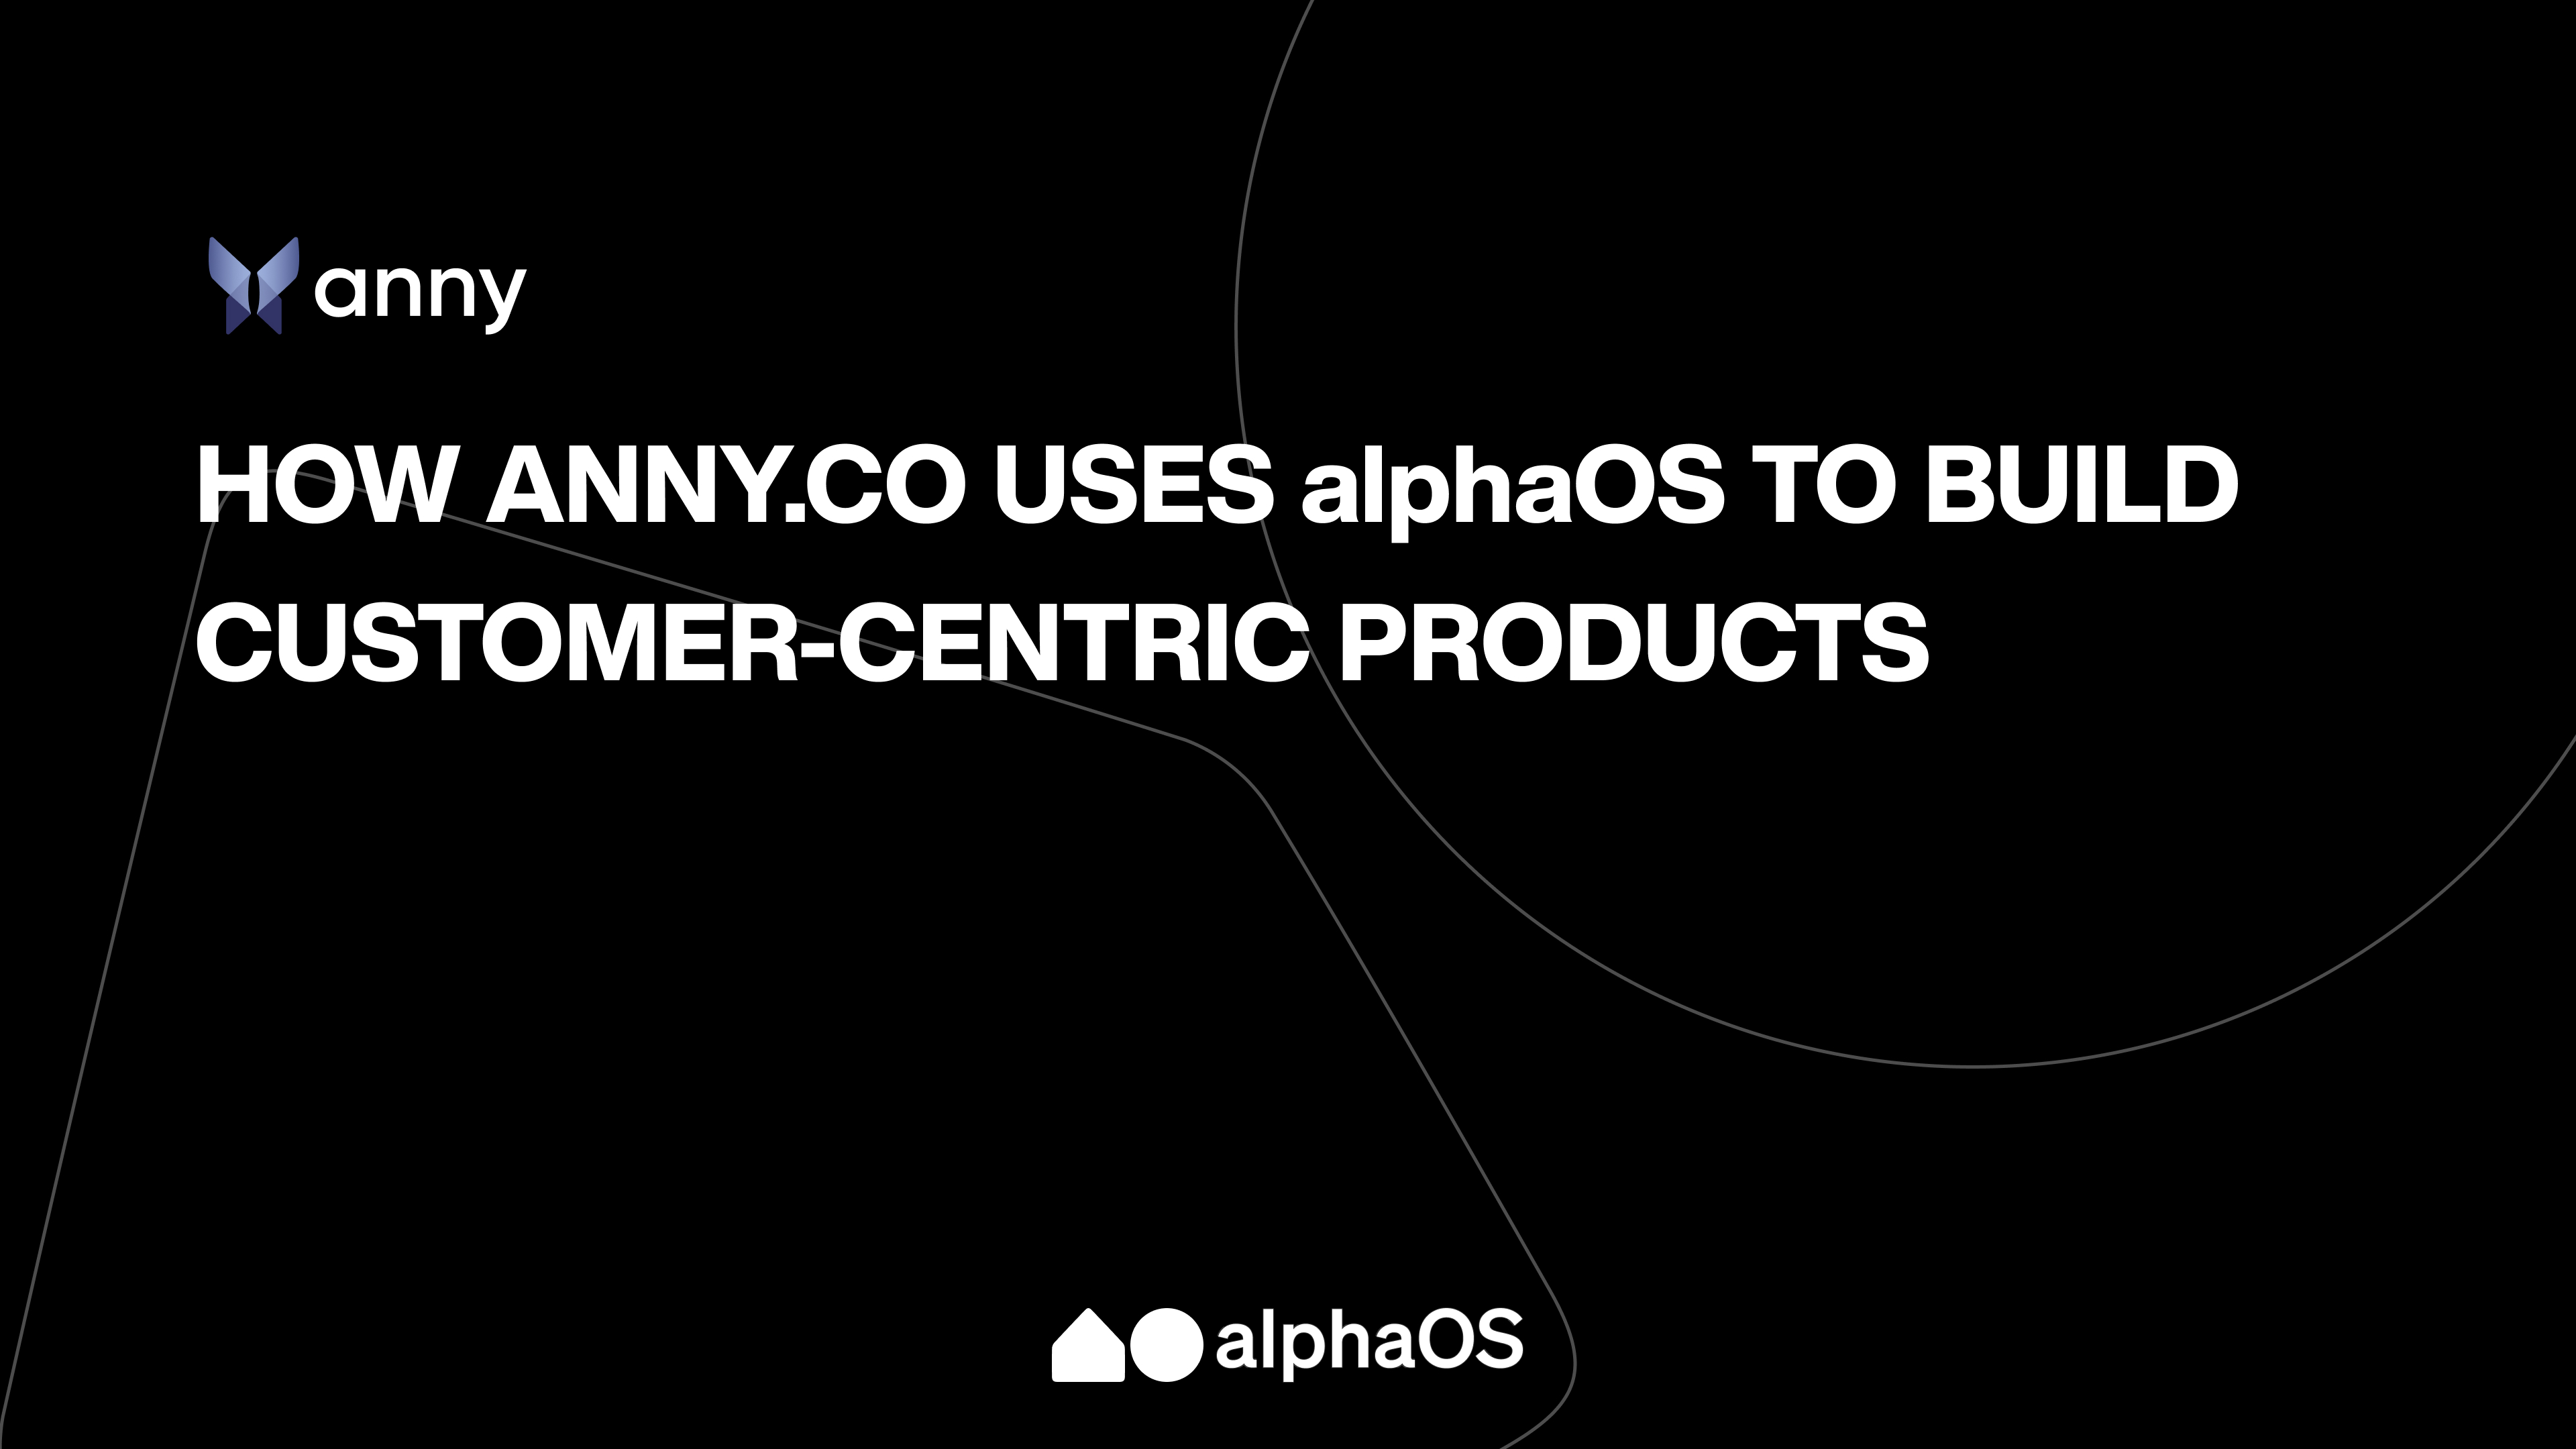 How Anny uses alphaOS to build customer-centric products